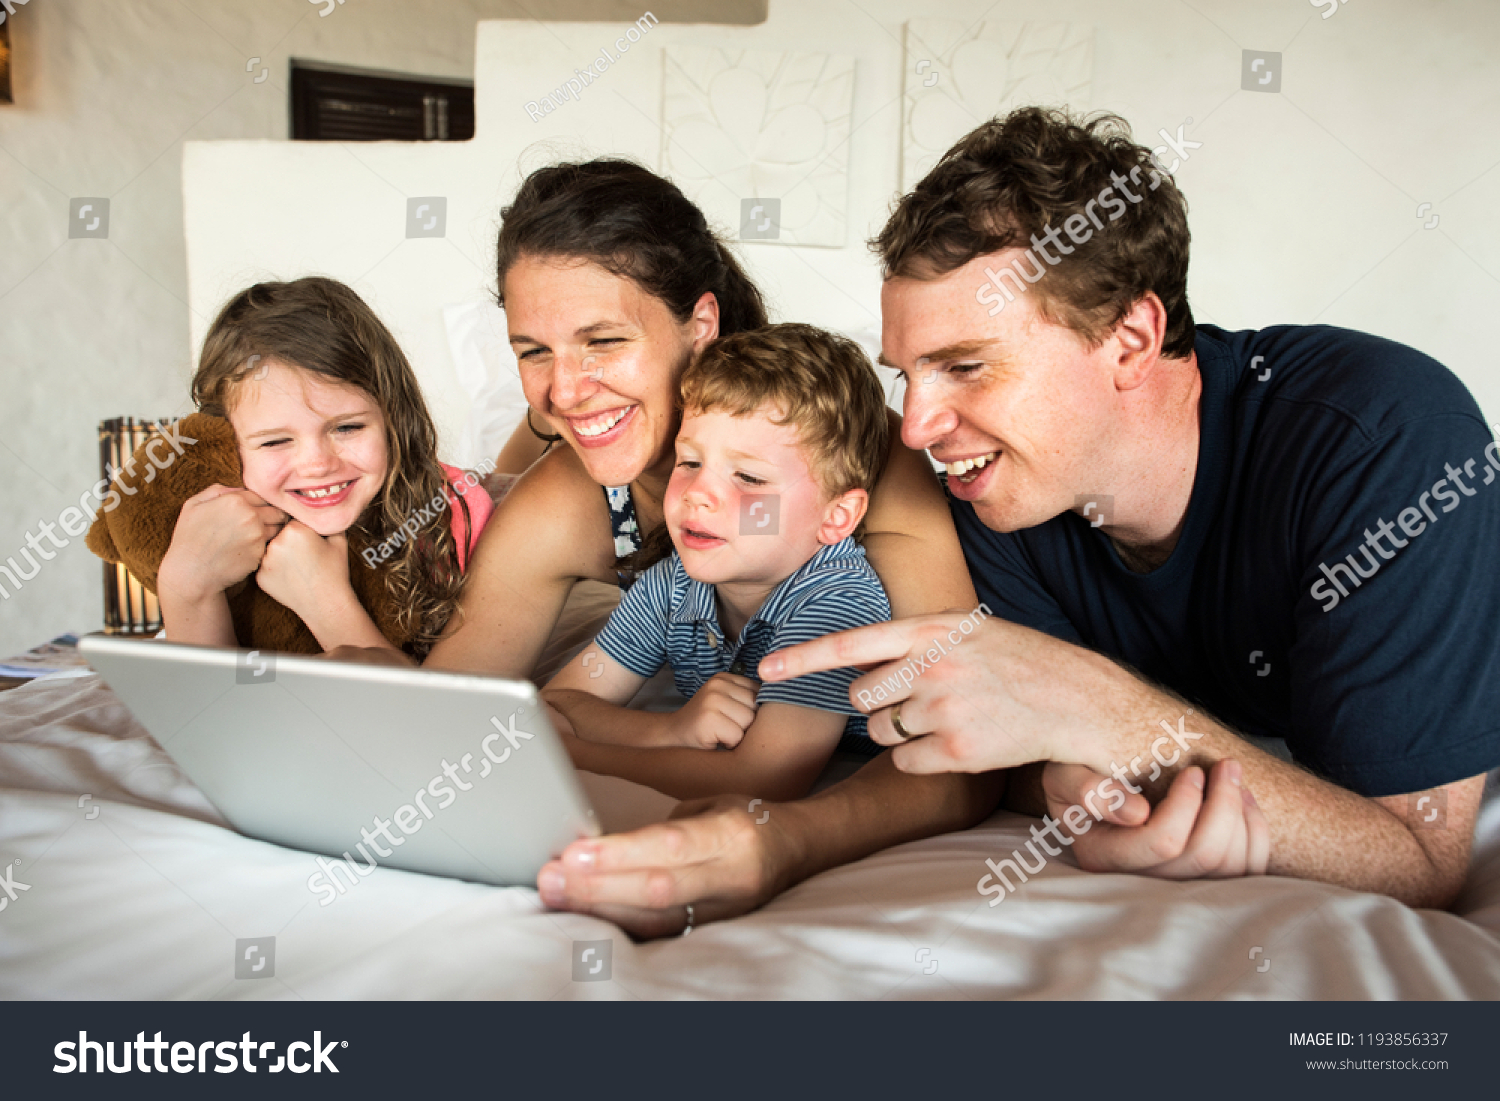 Family using a laptop in bed #1193856337